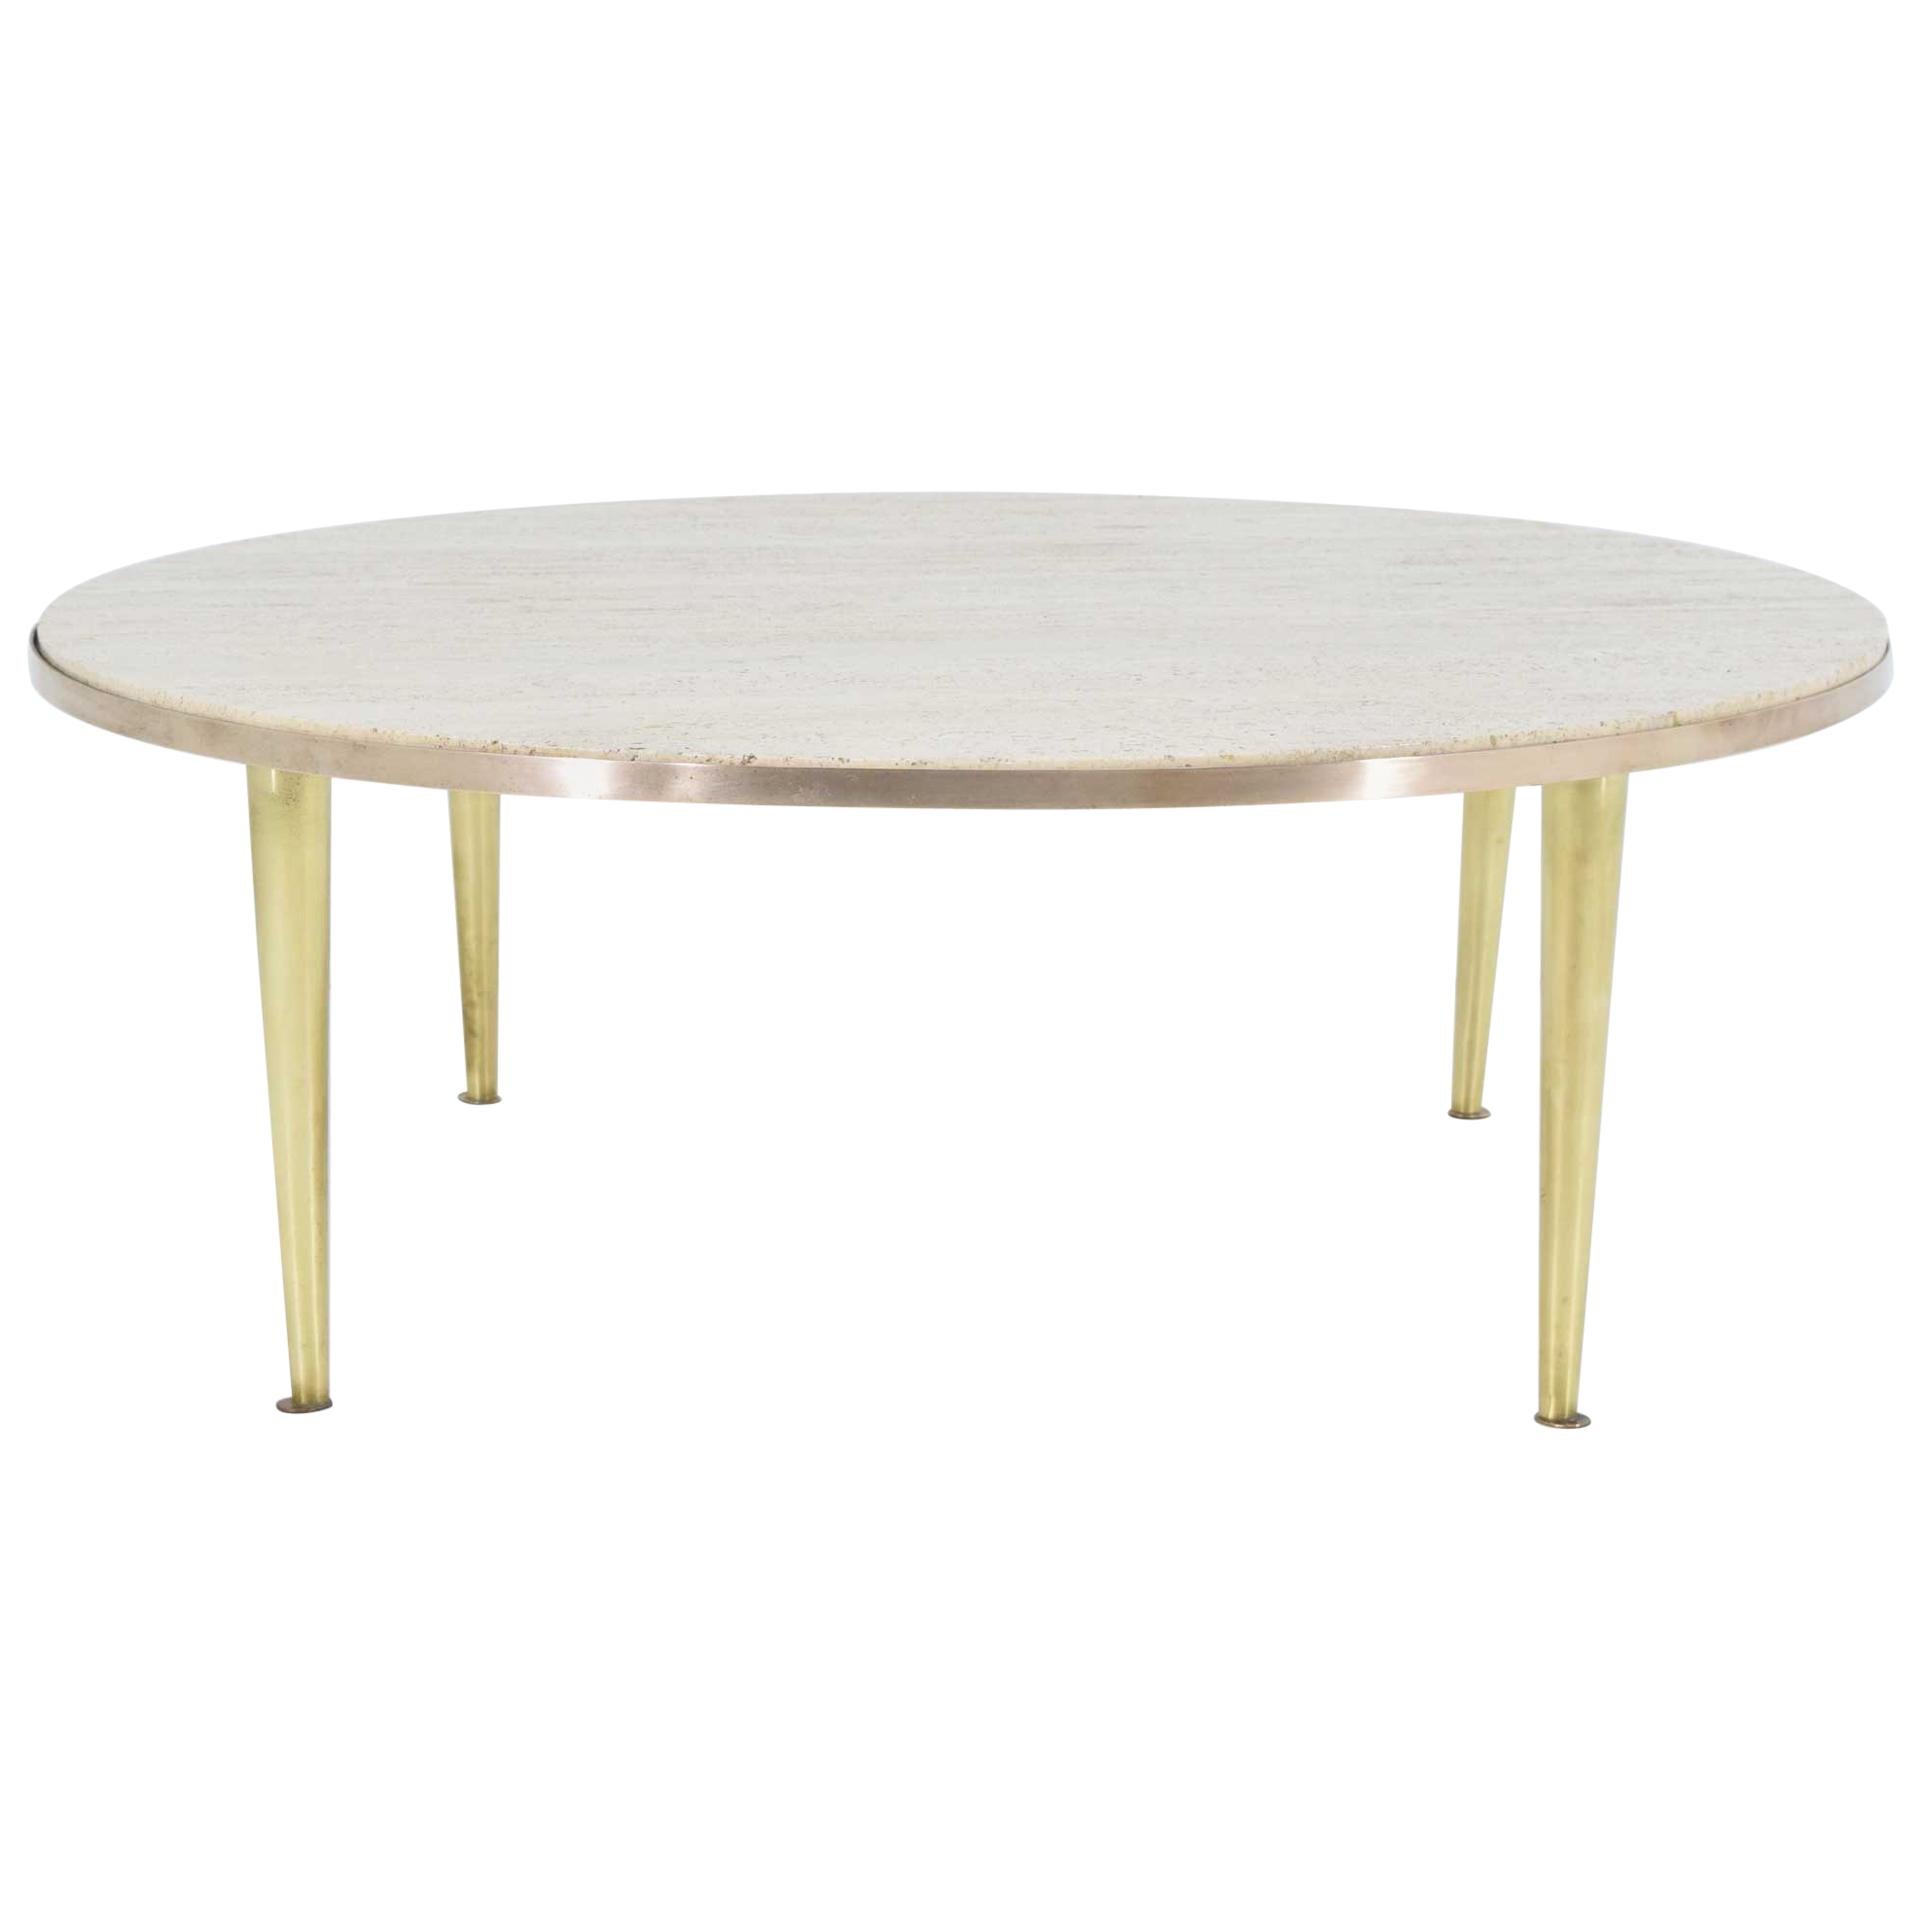 Italian Brass and Travertine Cocktail Table